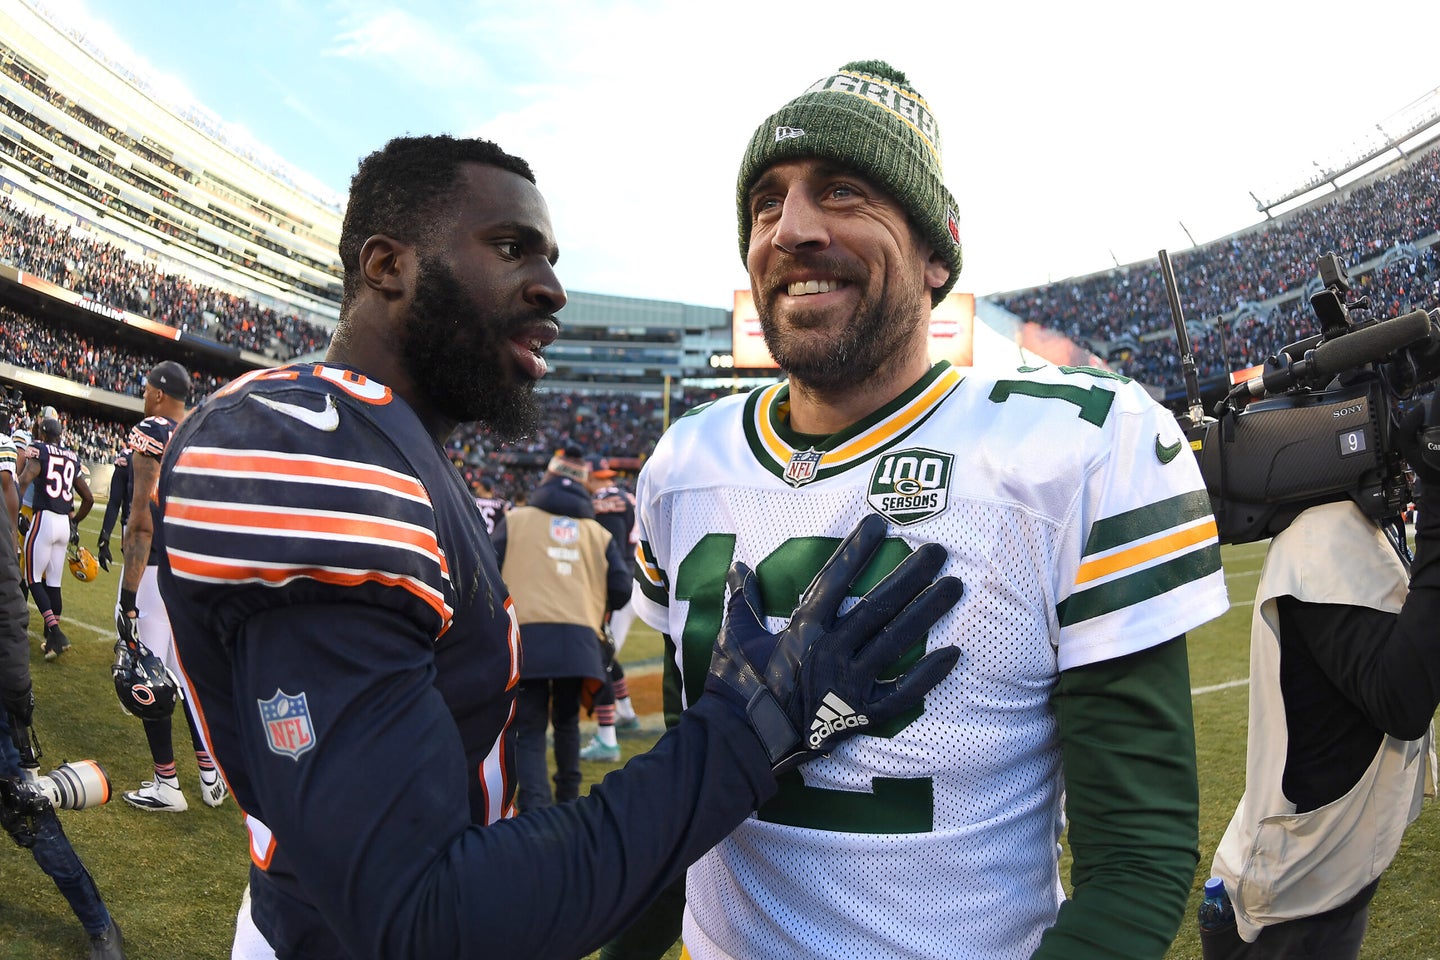 Chicago Bears cornerback Prince Amukamara shakes hands with Green Bay Packers quarterback Aaron Rodgers after a game between the two teams.